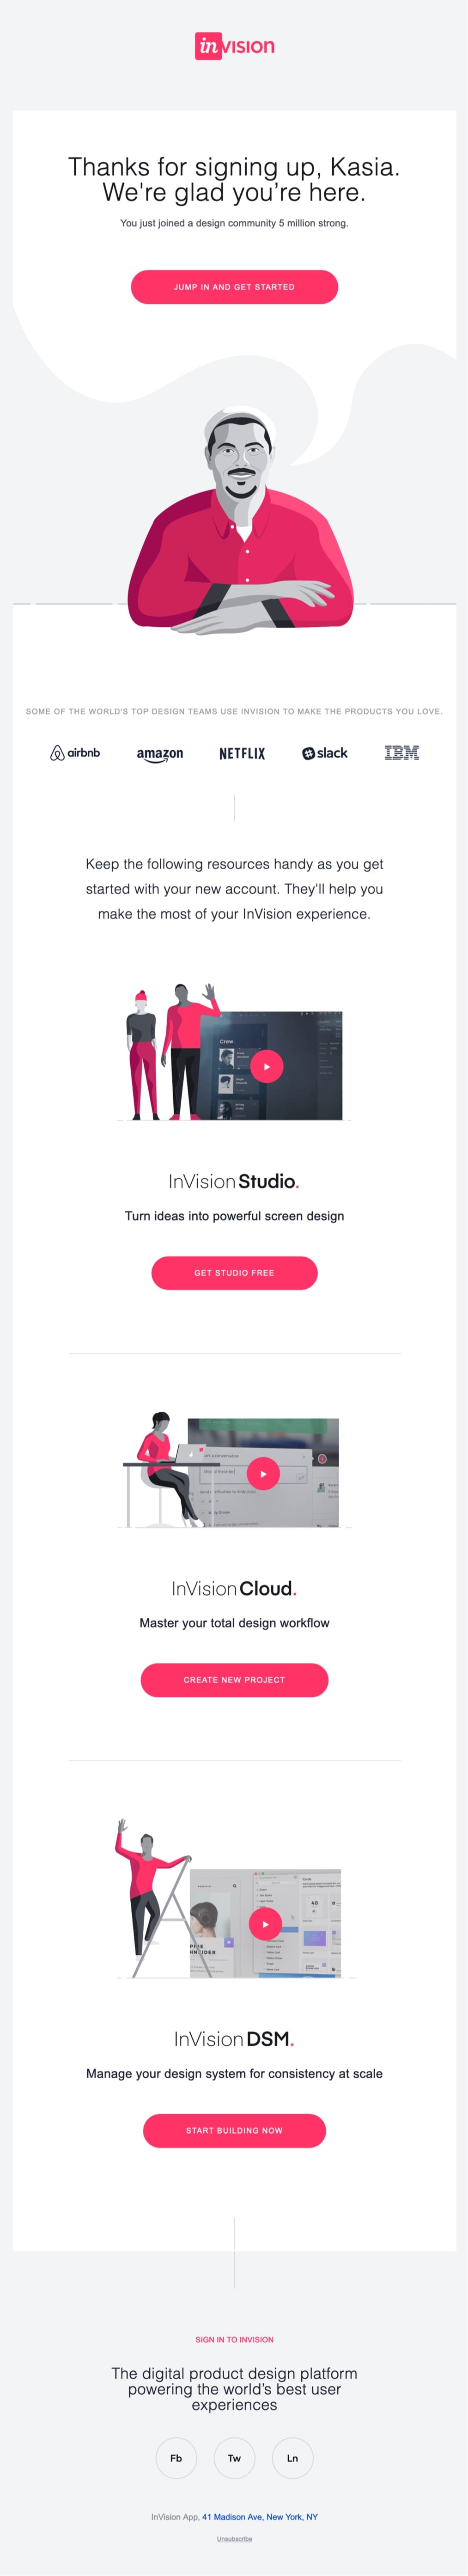 email-marketing-best-practices-invision